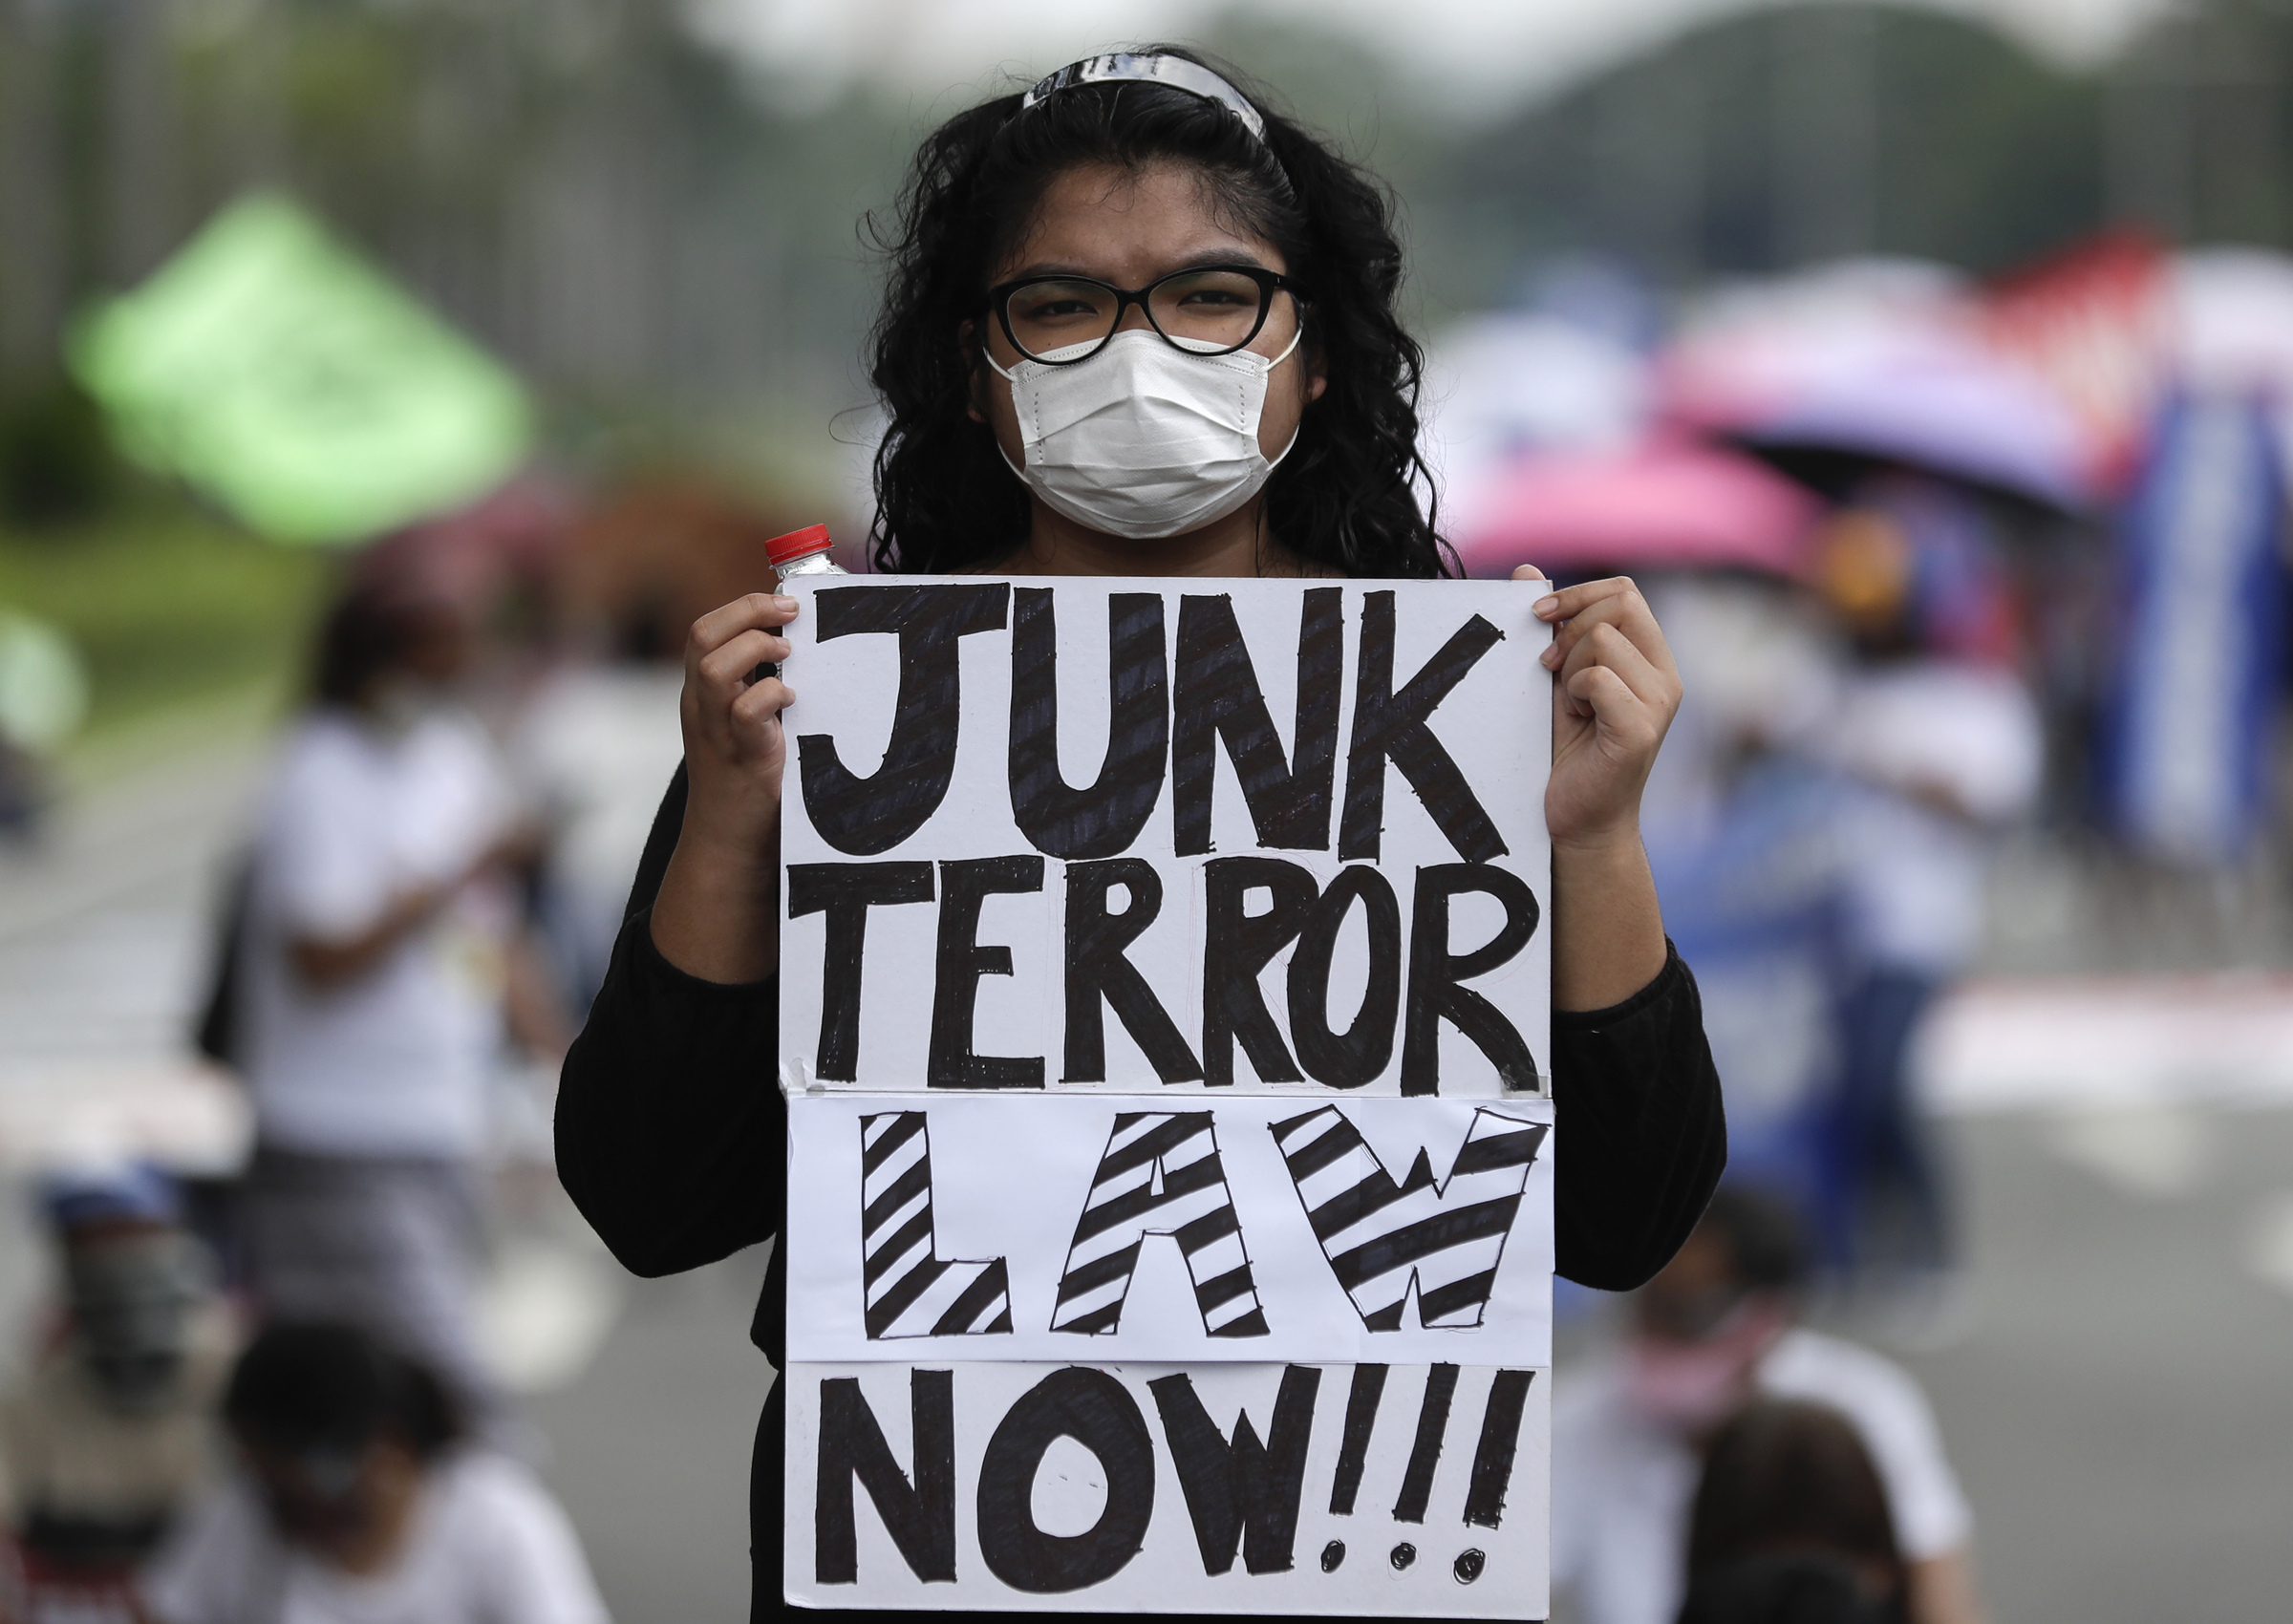 A protester holds a slogan during a rally against the anti-terror law at the University of the Philippines in Manila, Philippines on Tuesday July 7, 2020. Philippine President Rodrigo Duterte recently signed a widely opposed anti-terror law which critics fear could be used against human rights defenders and to muzzle dissent. (AP Photo/Aaron Favila)